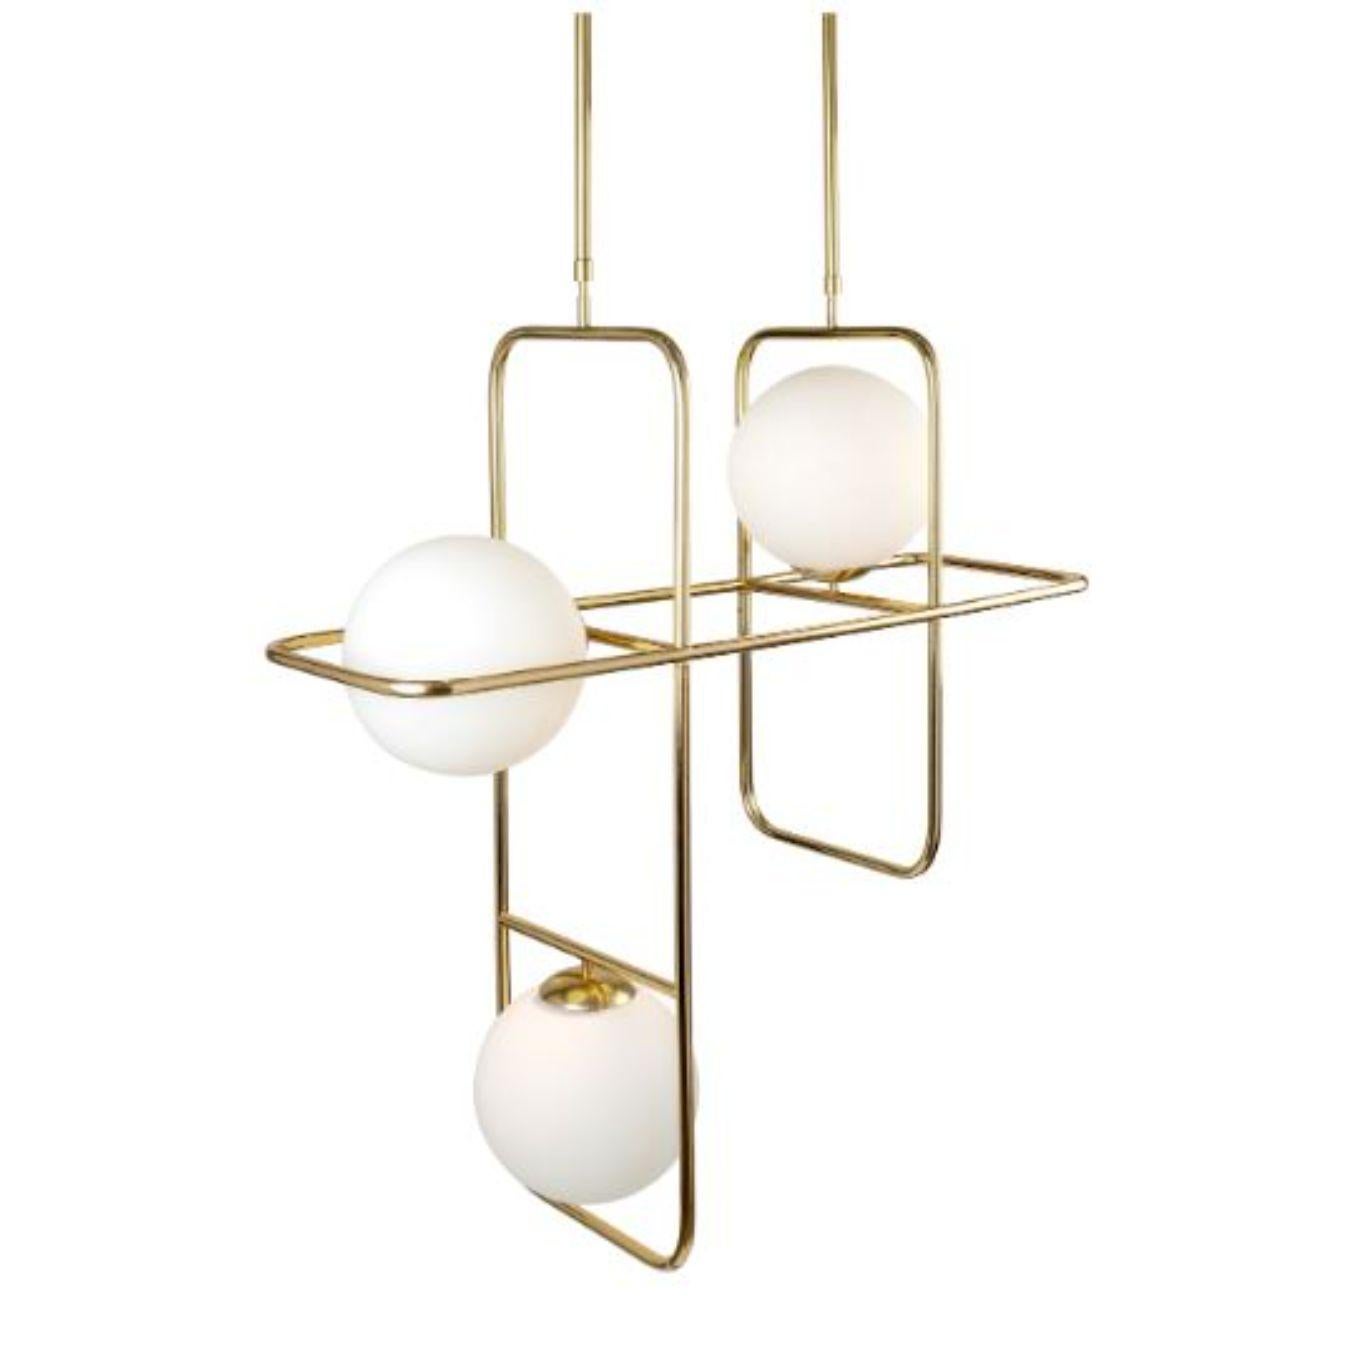 Brass Link I Suspension lamp by Dooq
Dimensions: W 100 x D 33 x H 100 cm
Materials: lacquered metal, polished or brushed metal, brass.
Also available in different colors and materials. 

Information:
230V/50Hz
3 x max. G9
5W LED

120V/60Hz
3 x max.